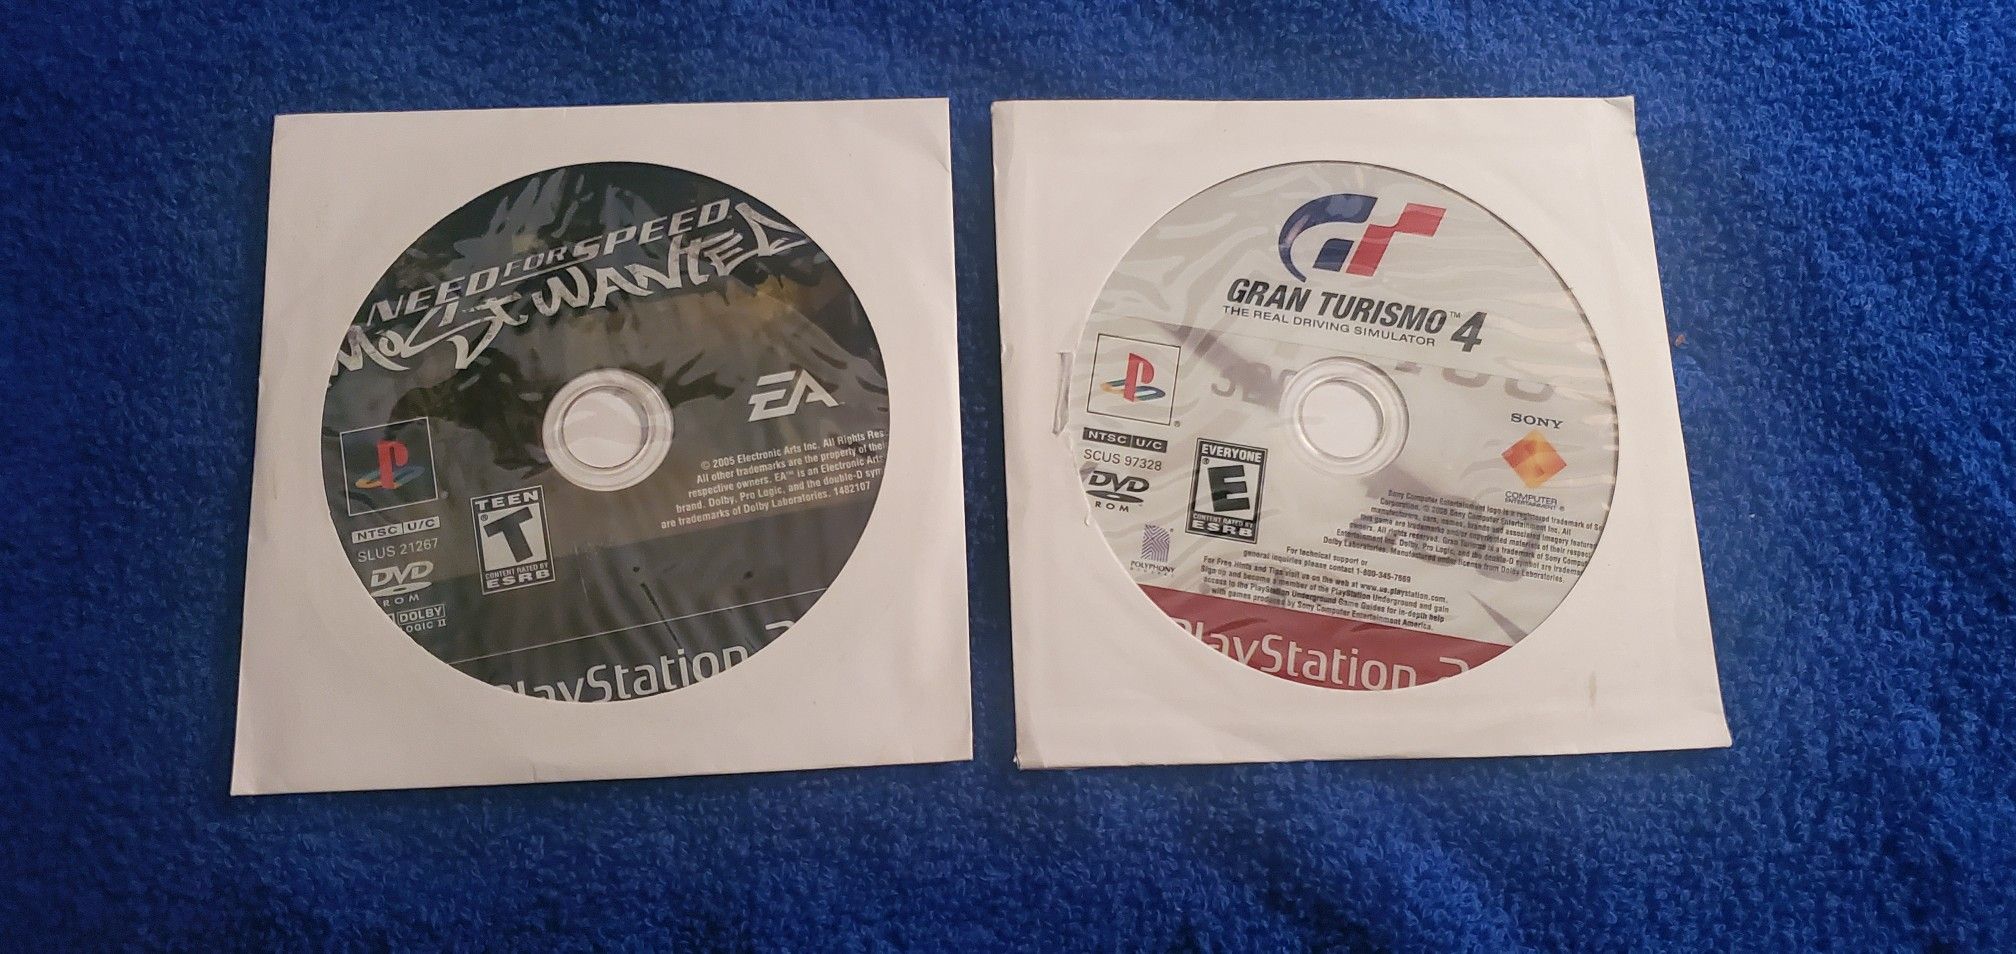 NFS MOST WANTED & GRAN TURISMO 4 PS2 GAME DISC ONLY COMBO